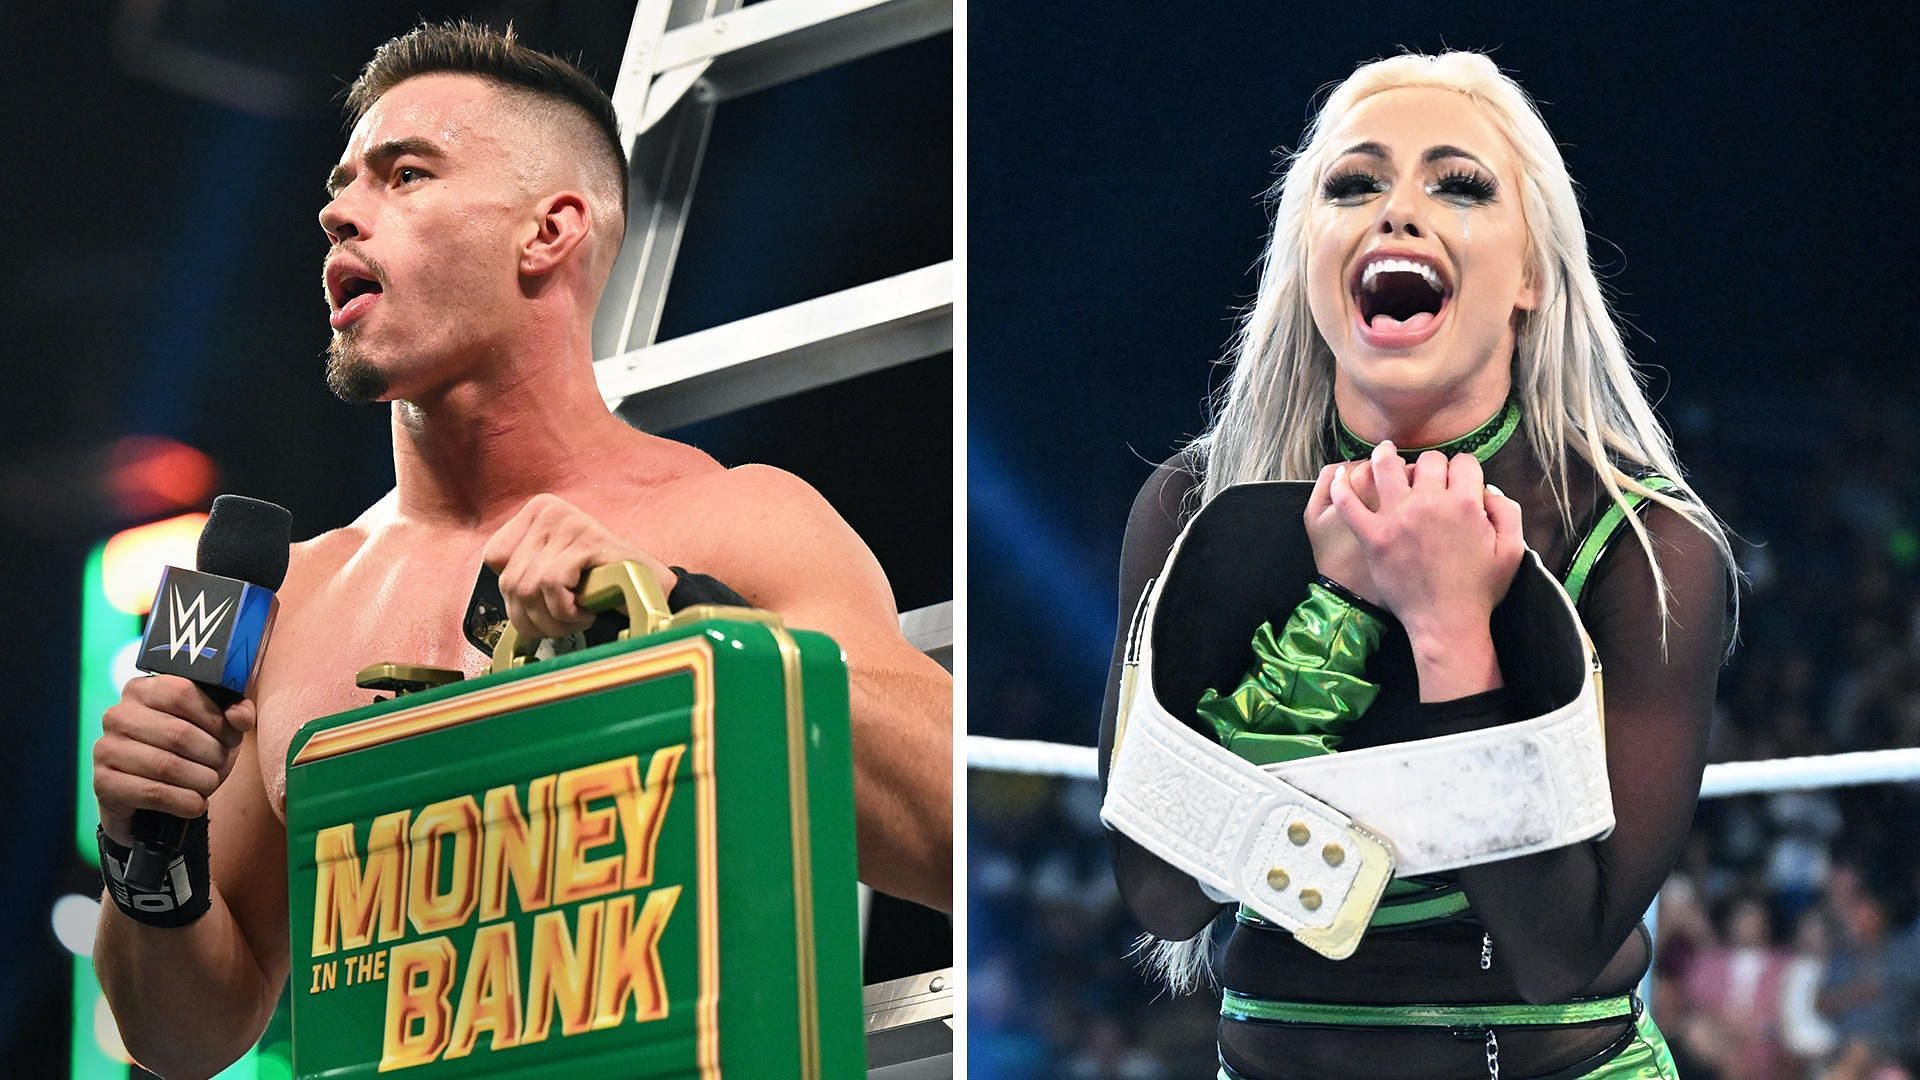 Liv Morgan and Theory won their respective Money in the Bank matches this year